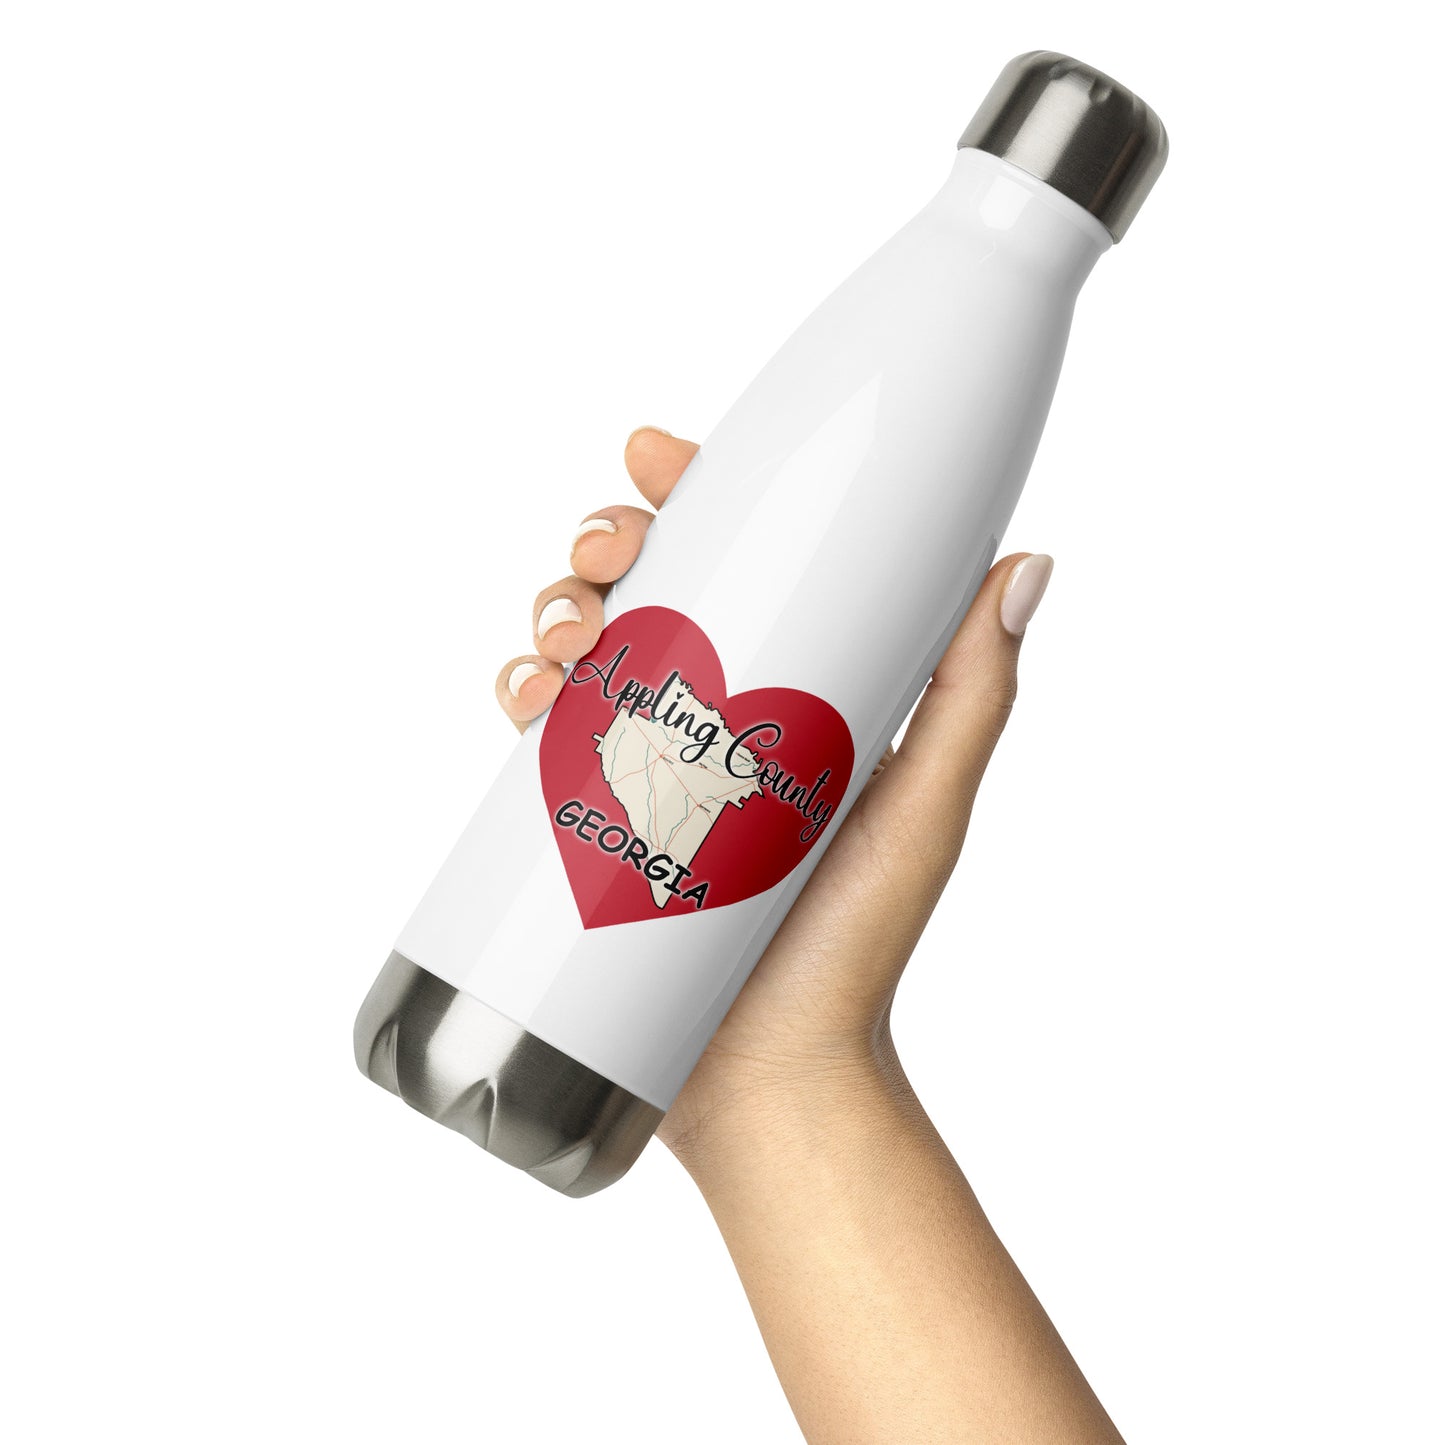 Appling County Georgia on Large Heart Stainless Steel Water Bottle 17 oz (500 ml)